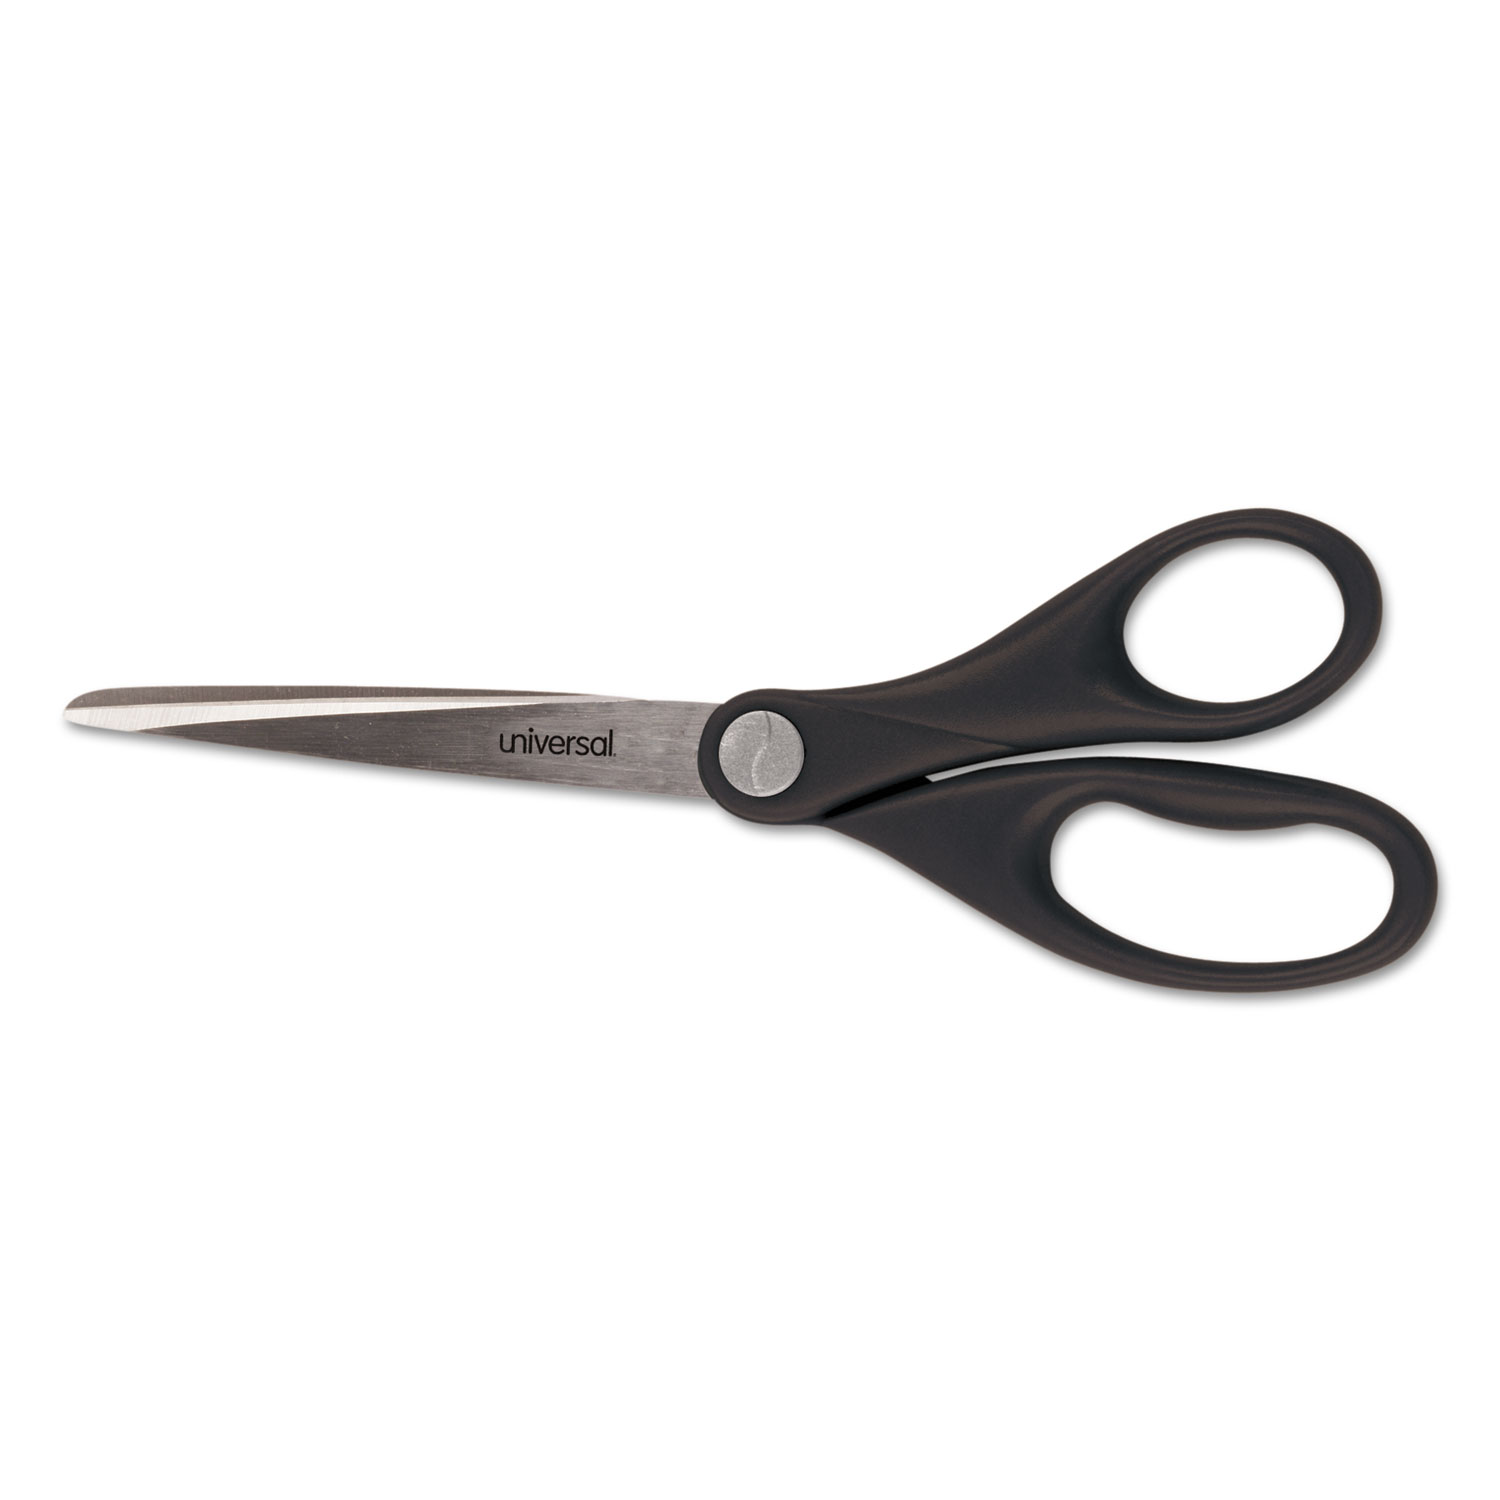  Universal UNV92008 Stainless Steel Office Scissors, Pointed Tip, 7 Long, 3 Cut Length, Black Straight Handle (UNV92008) 